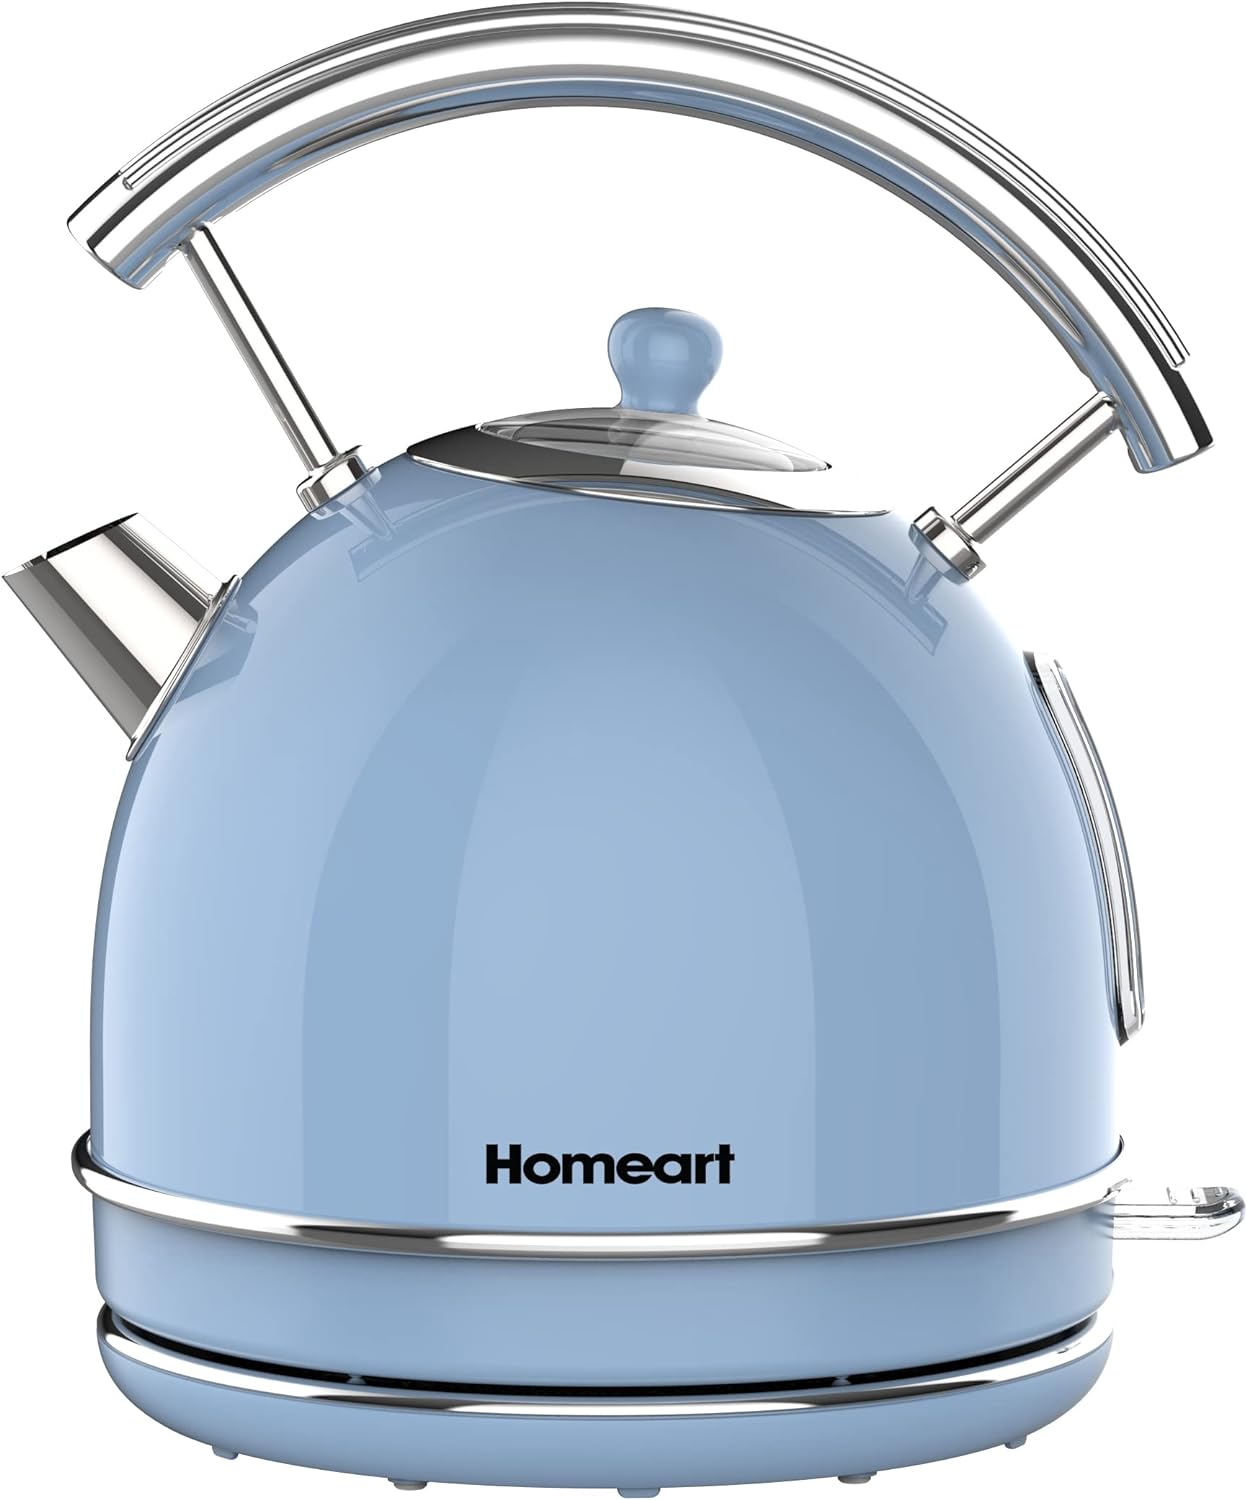 Homeart Alyssa Dome Retro Electric Cordless Kettle - Stainless Steel With Removable Filter, Fast Boiling and Auto Shut-off - 1.7L Capacity, Powder Blue